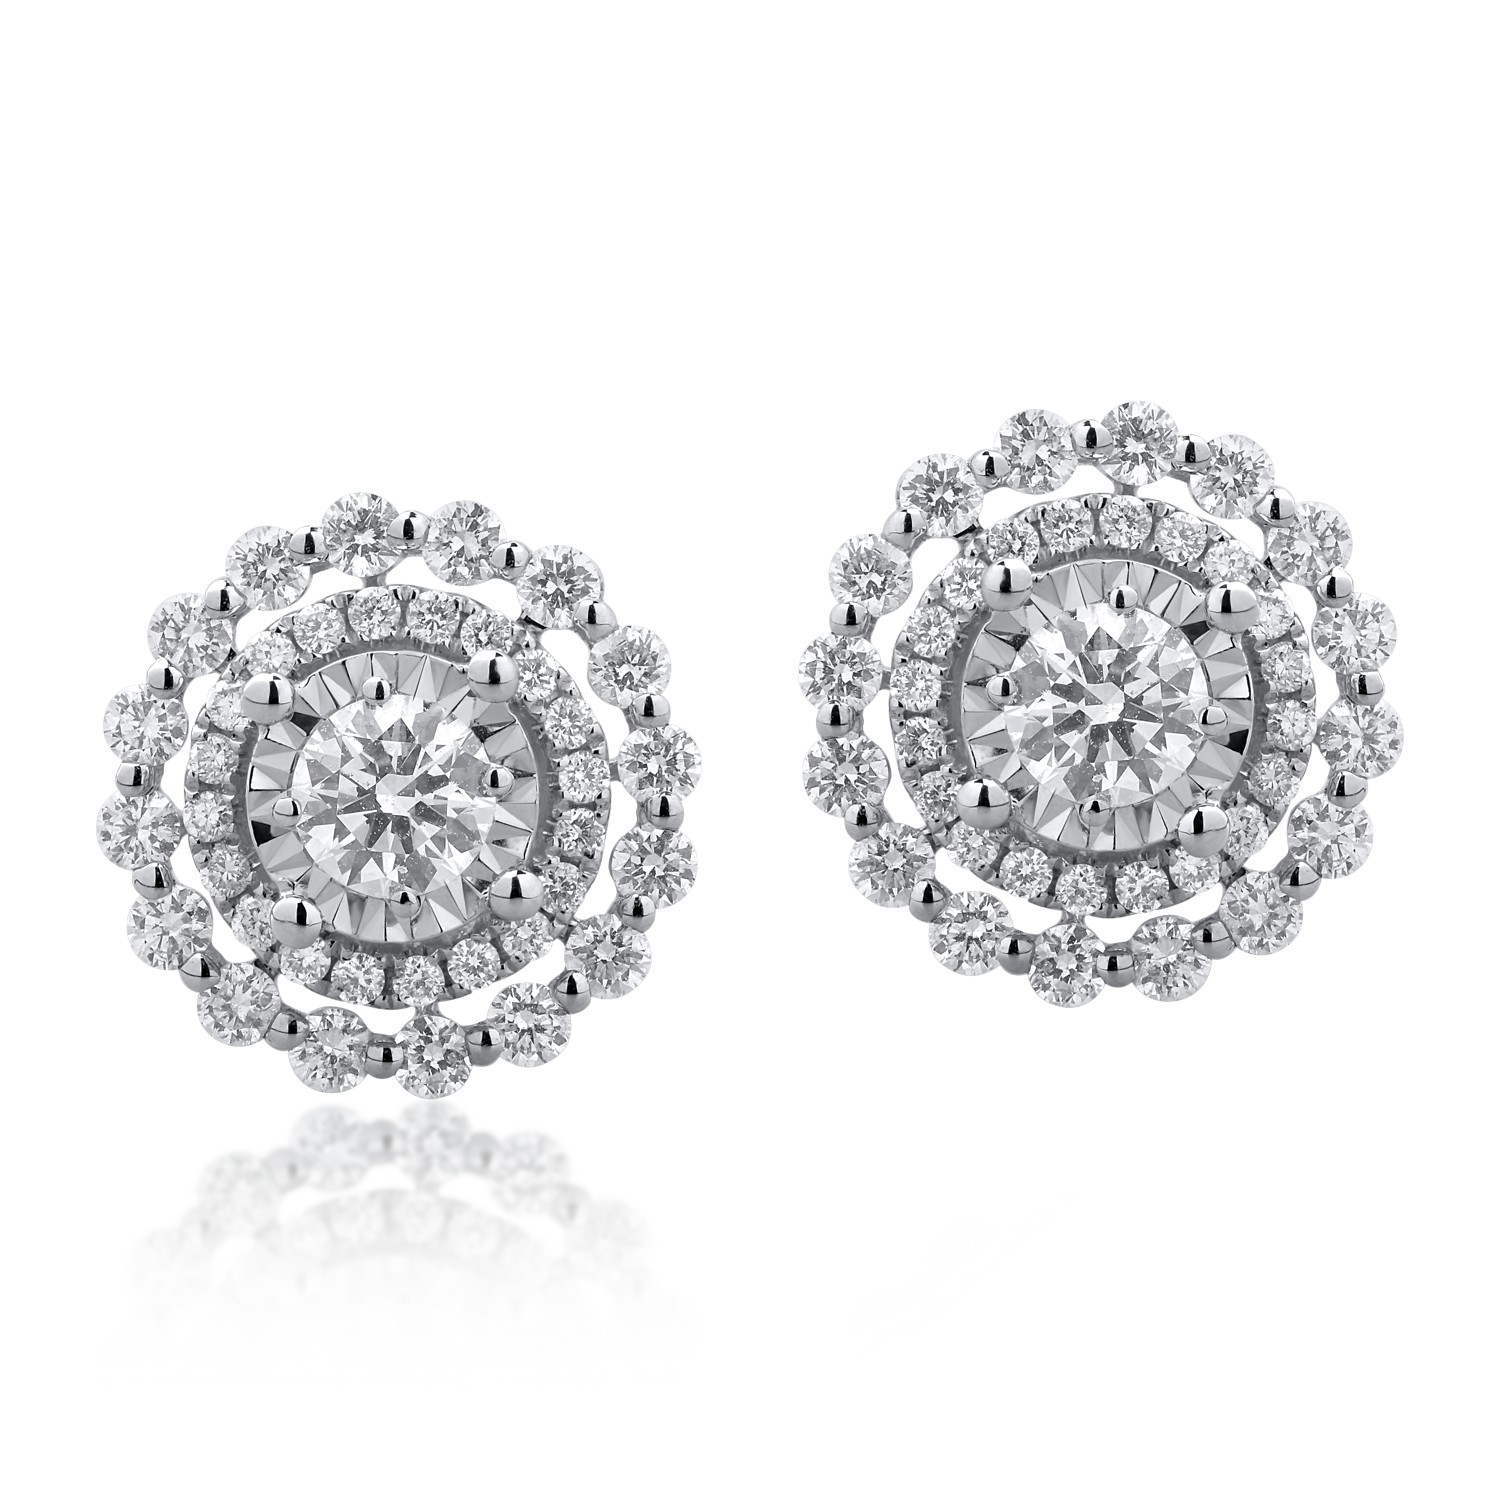 18K white gold earrings with 1.05ct diamonds